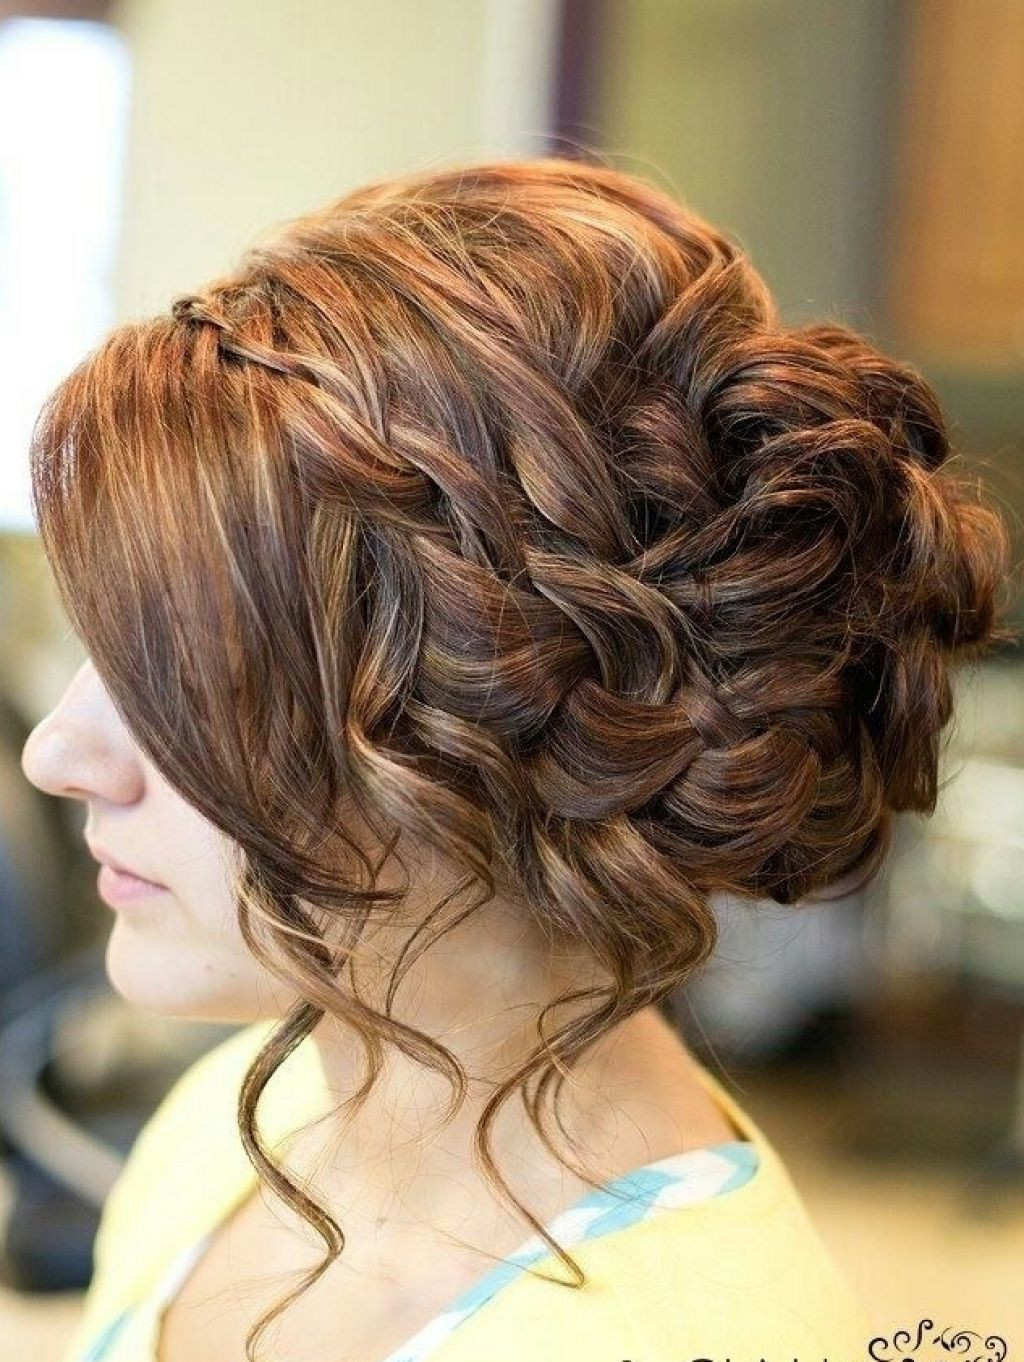 Prom Updo Hairstyles For Long Hair
 14 Prom Hairstyles for Long Hair that are Simply Adorable